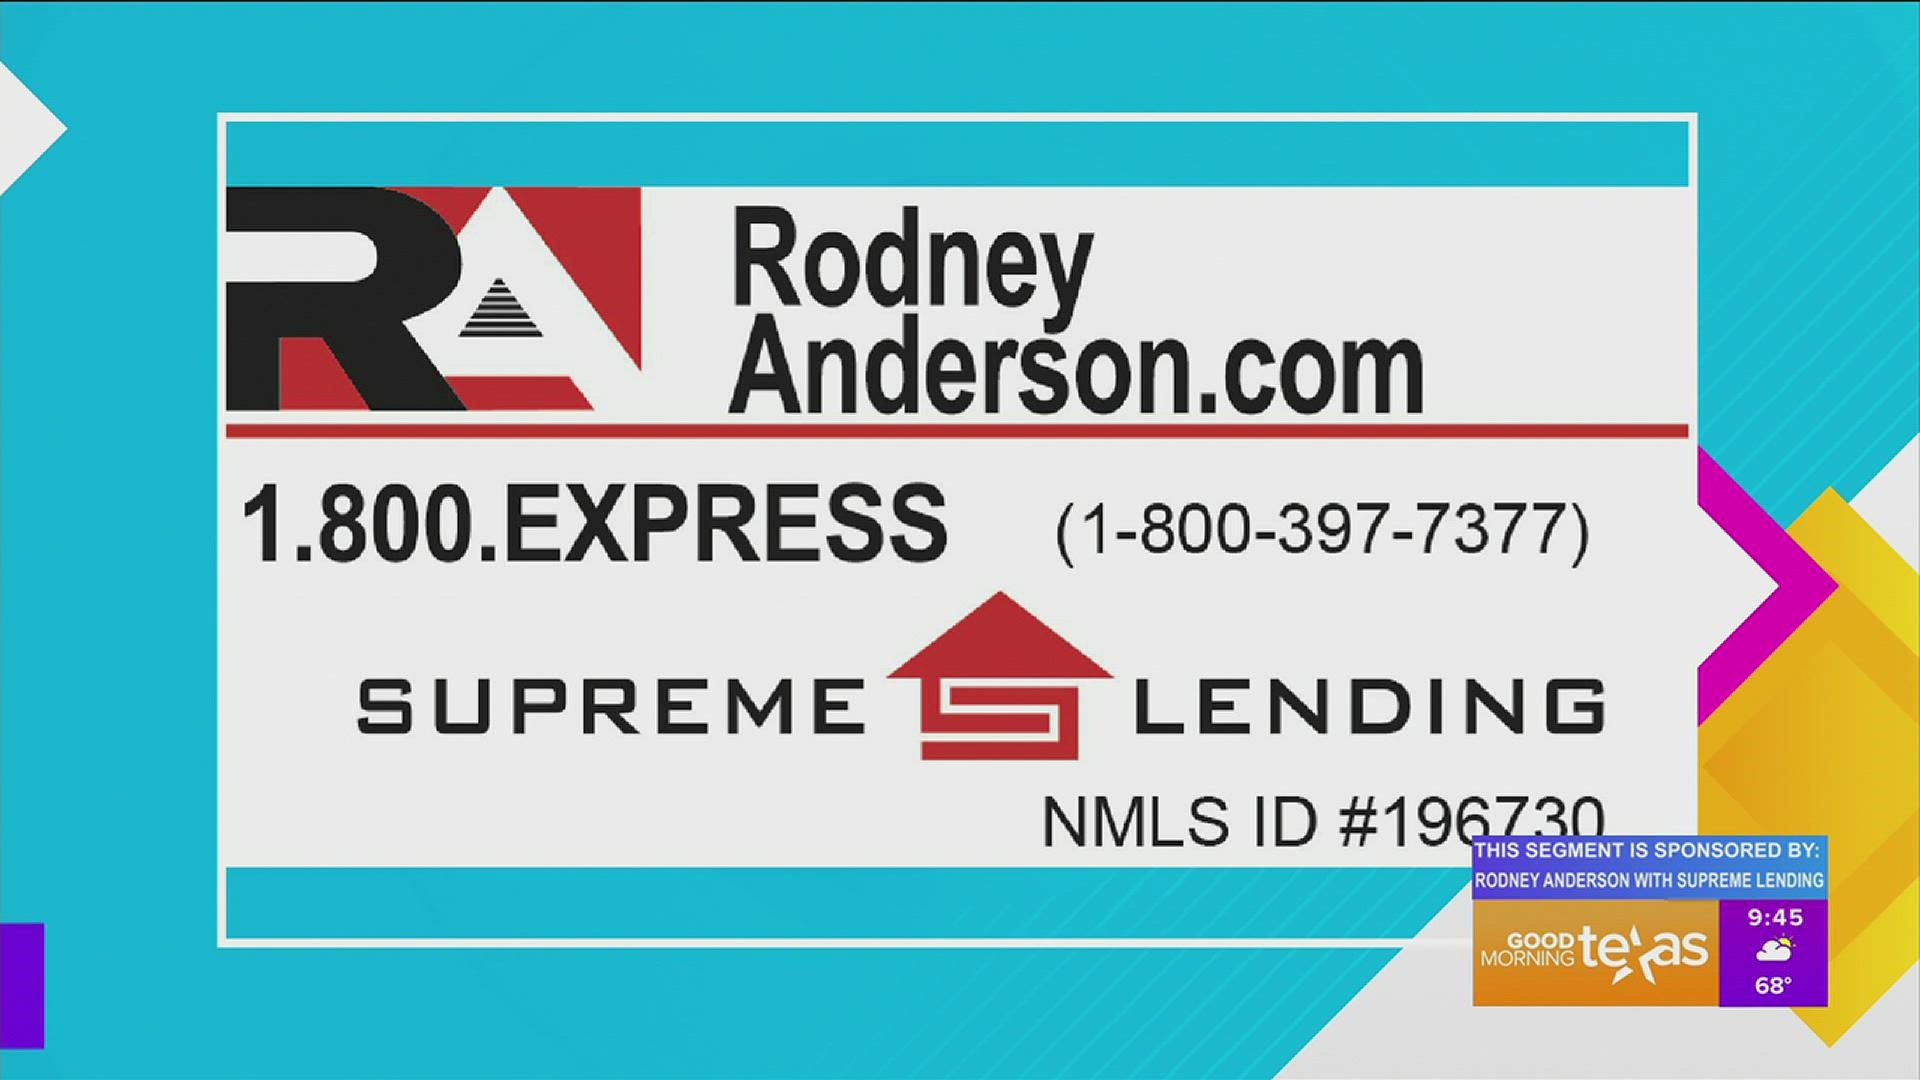 This segment is sponsored by: Rodney Anderson with Supreme Lending